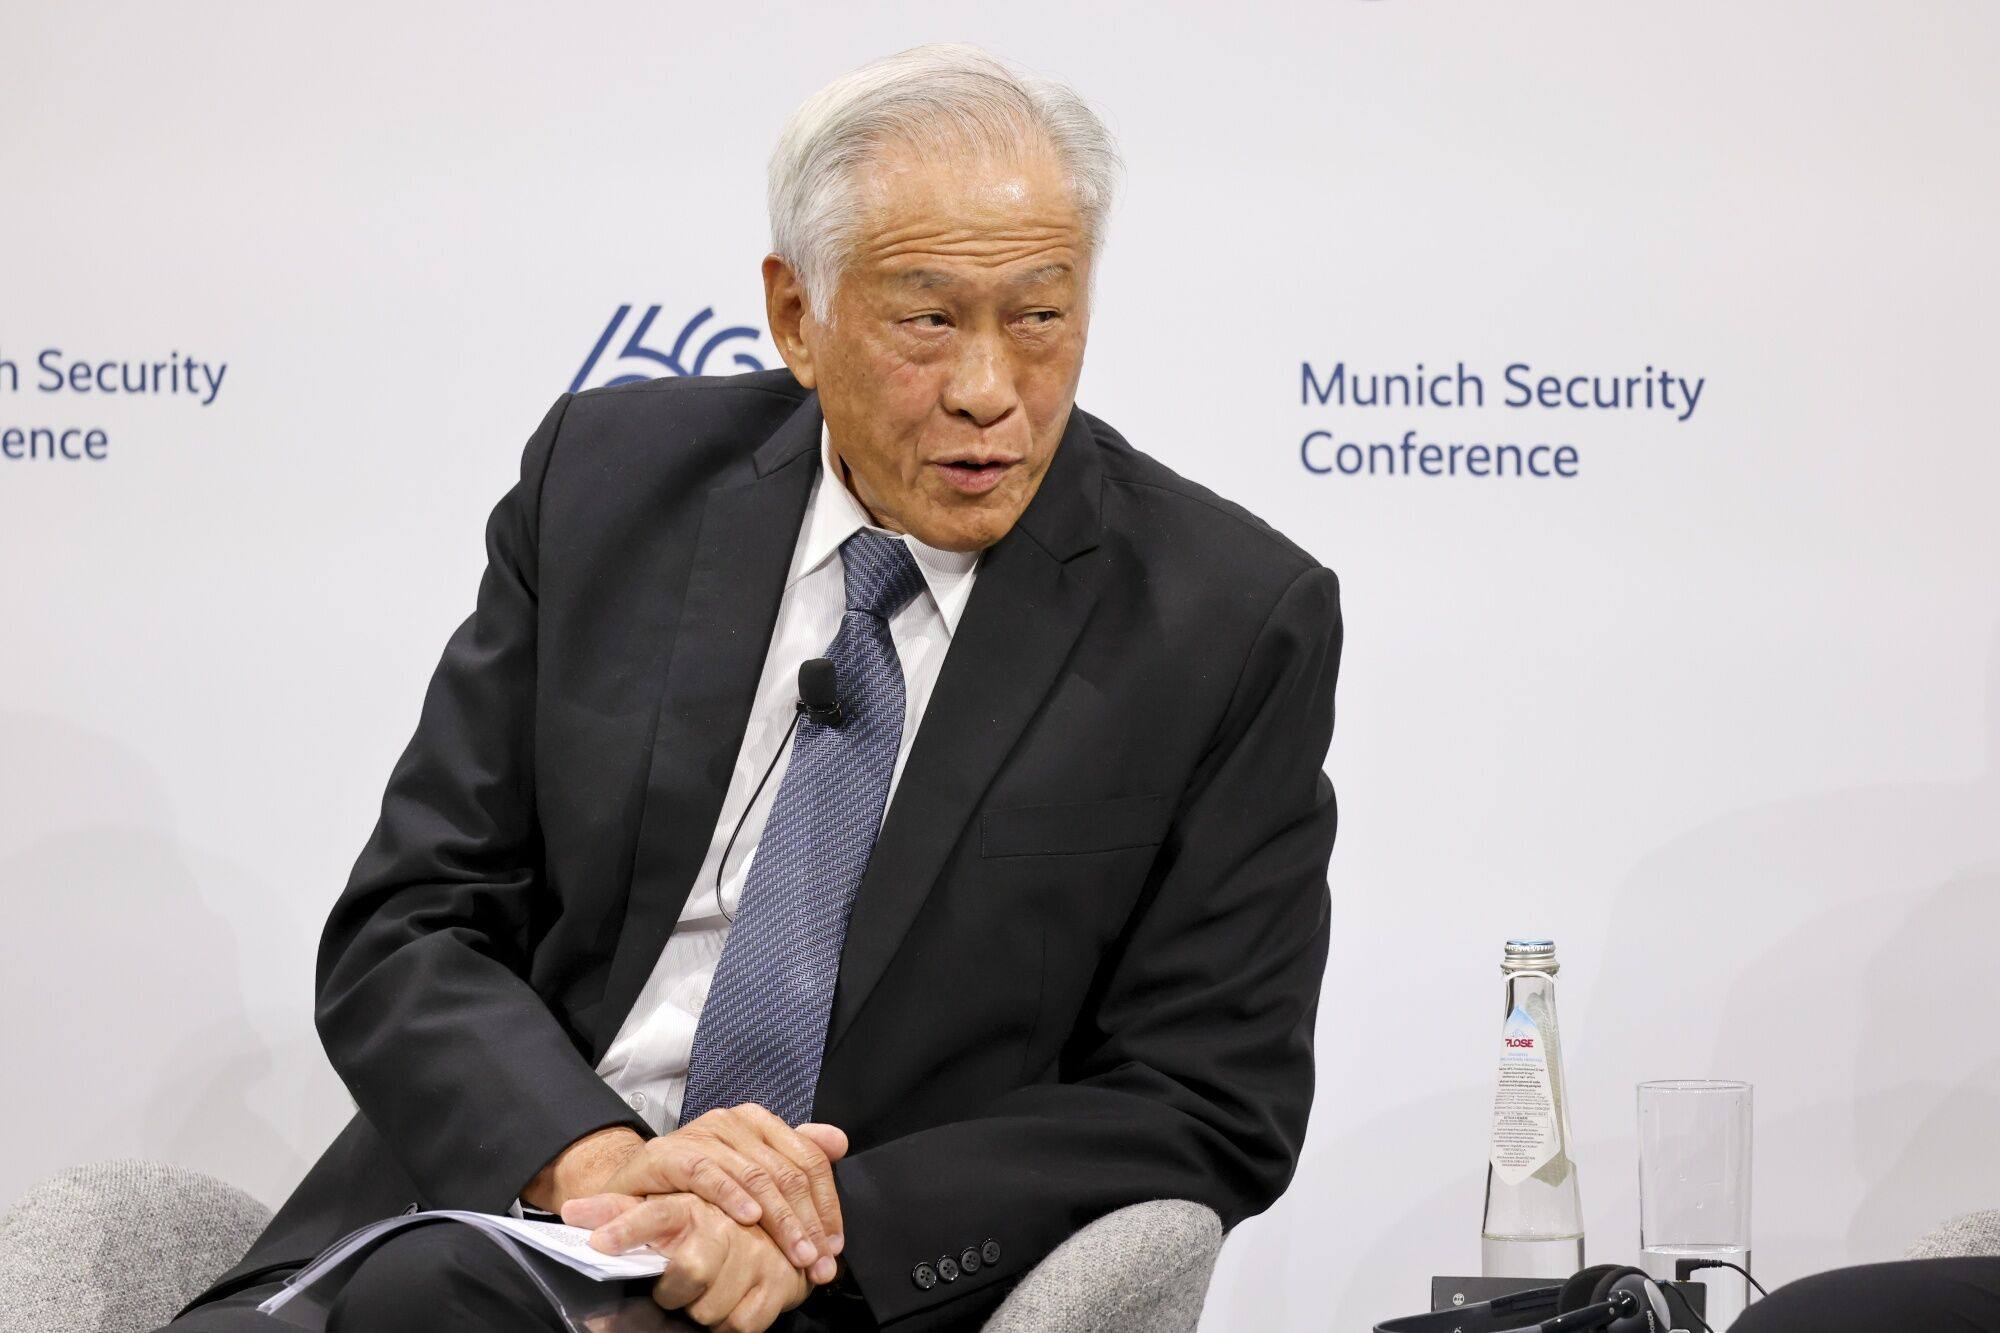 Singapore’s Defence minister Ng Eng Hen speaks at the Munich Security Conference in February. Photo: Bloomberg